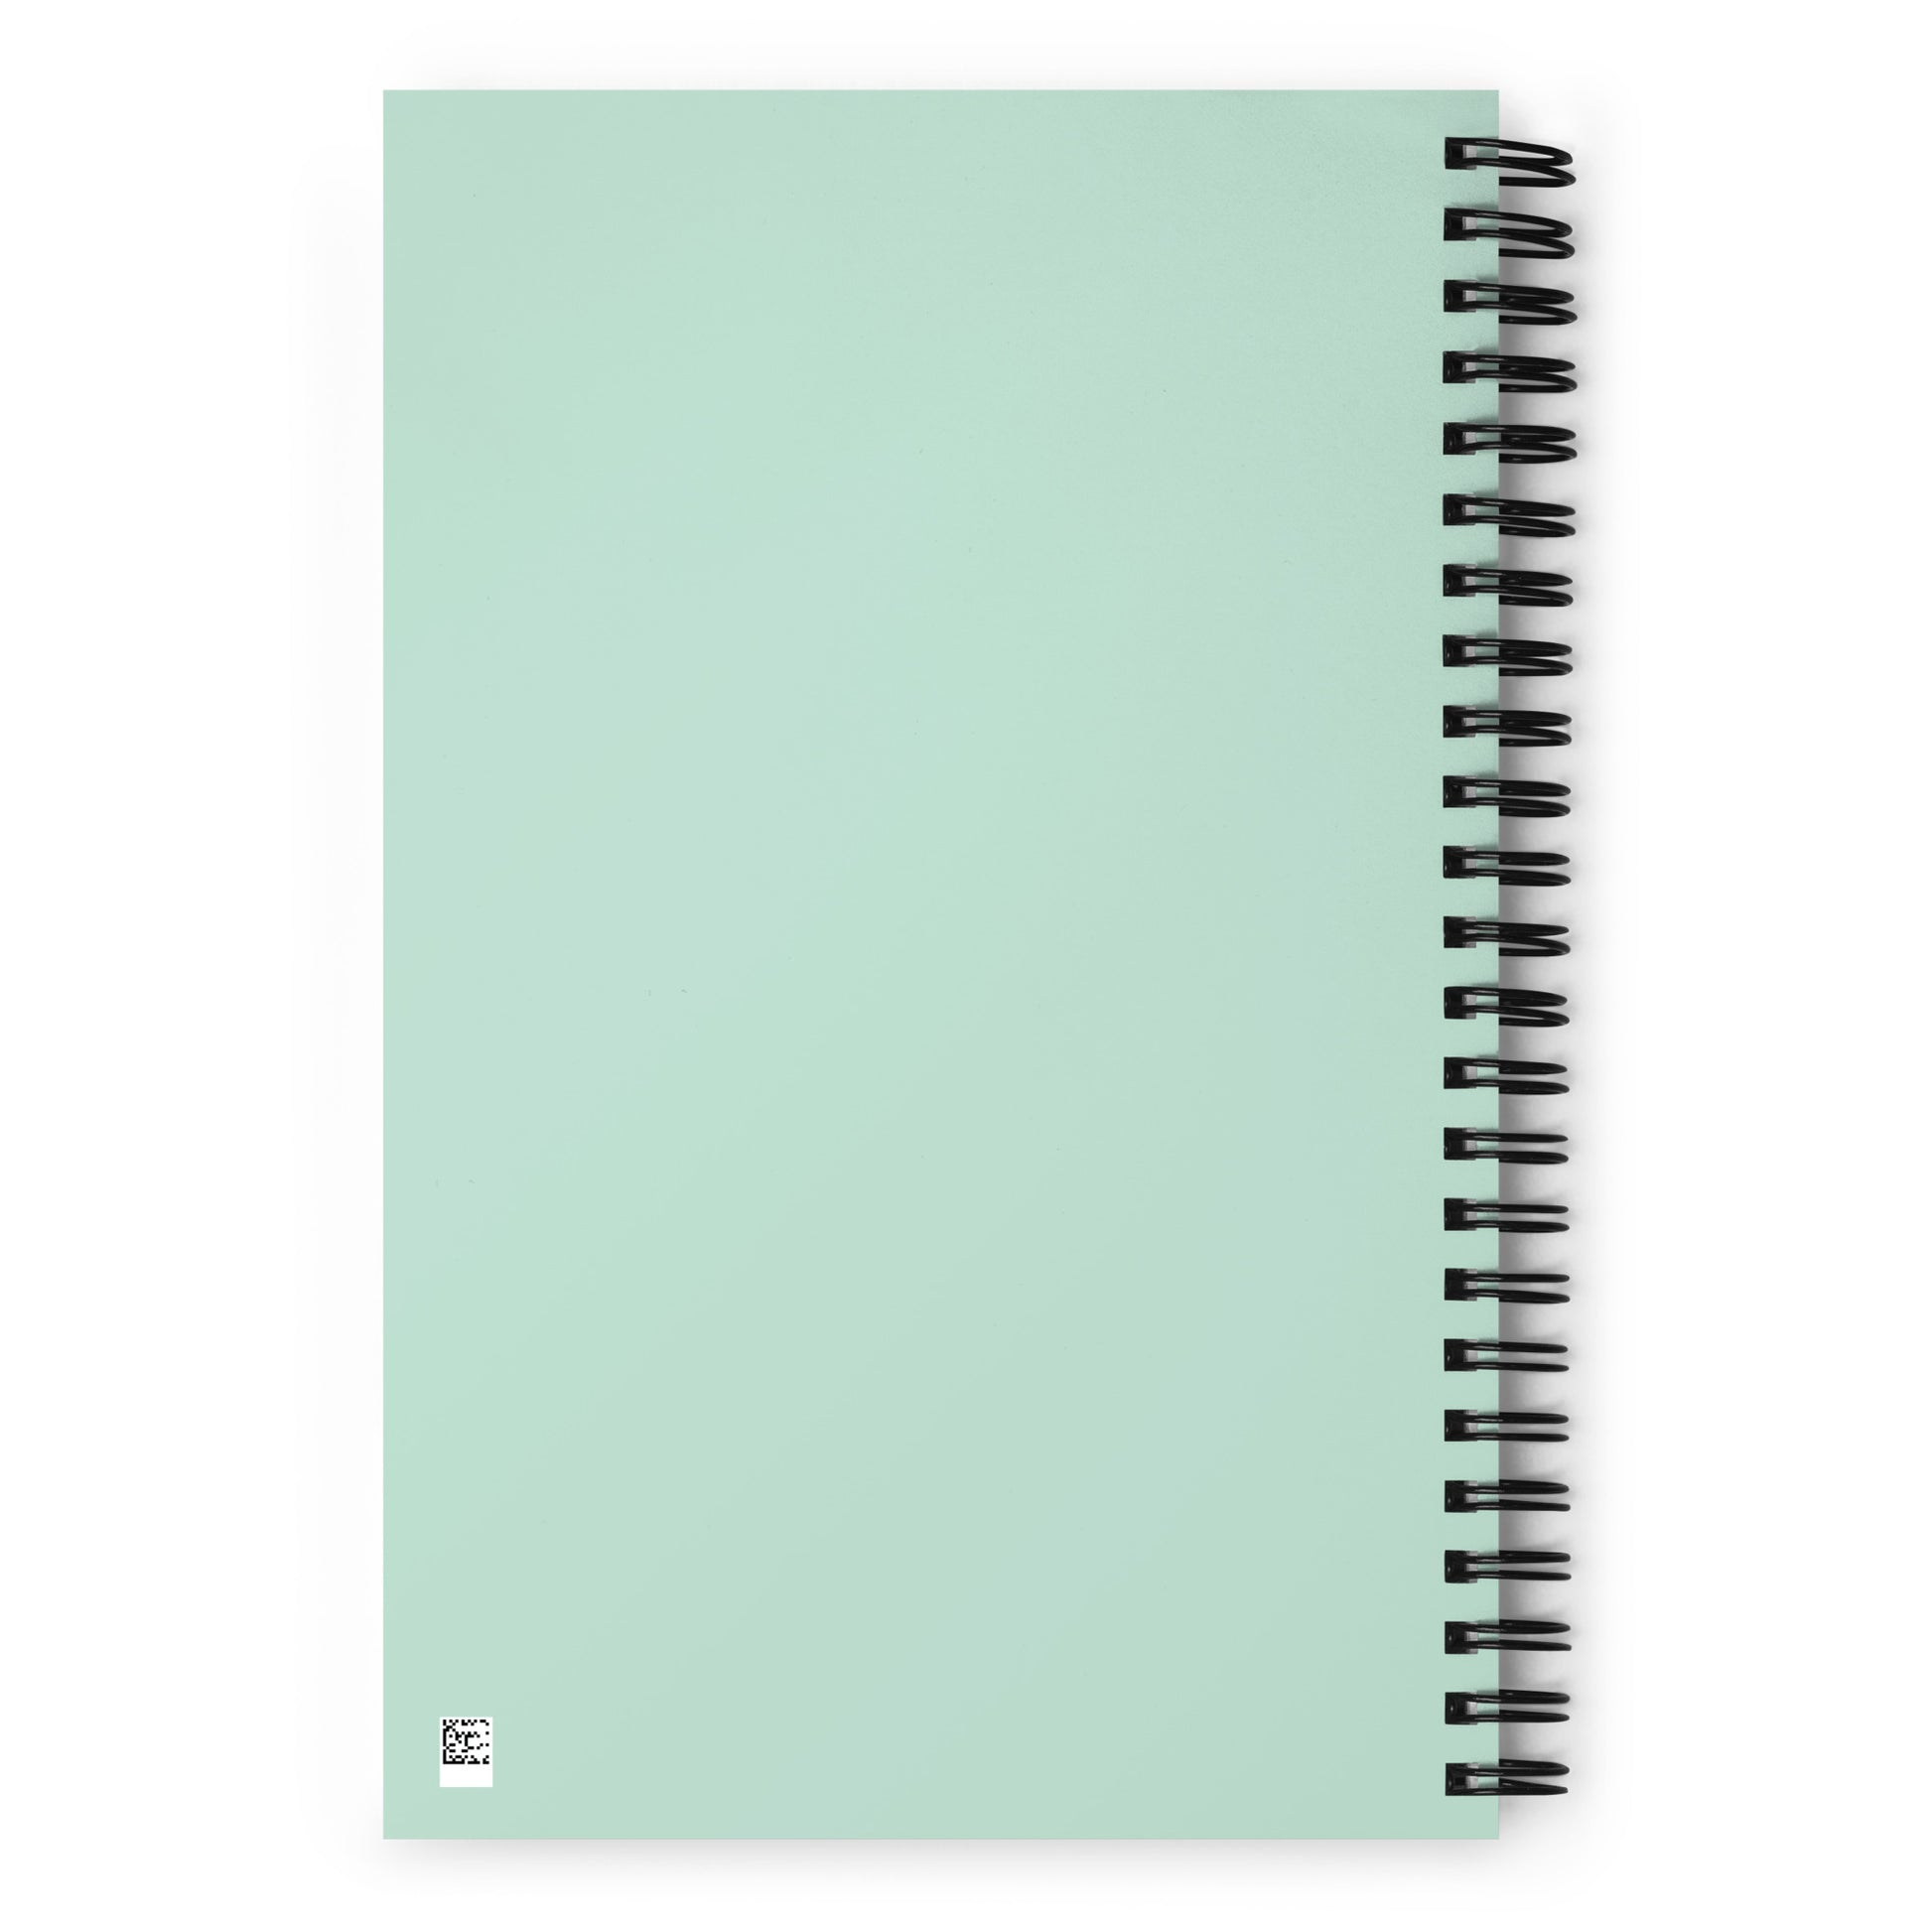 The back side of a light mint green wirebound notebook.